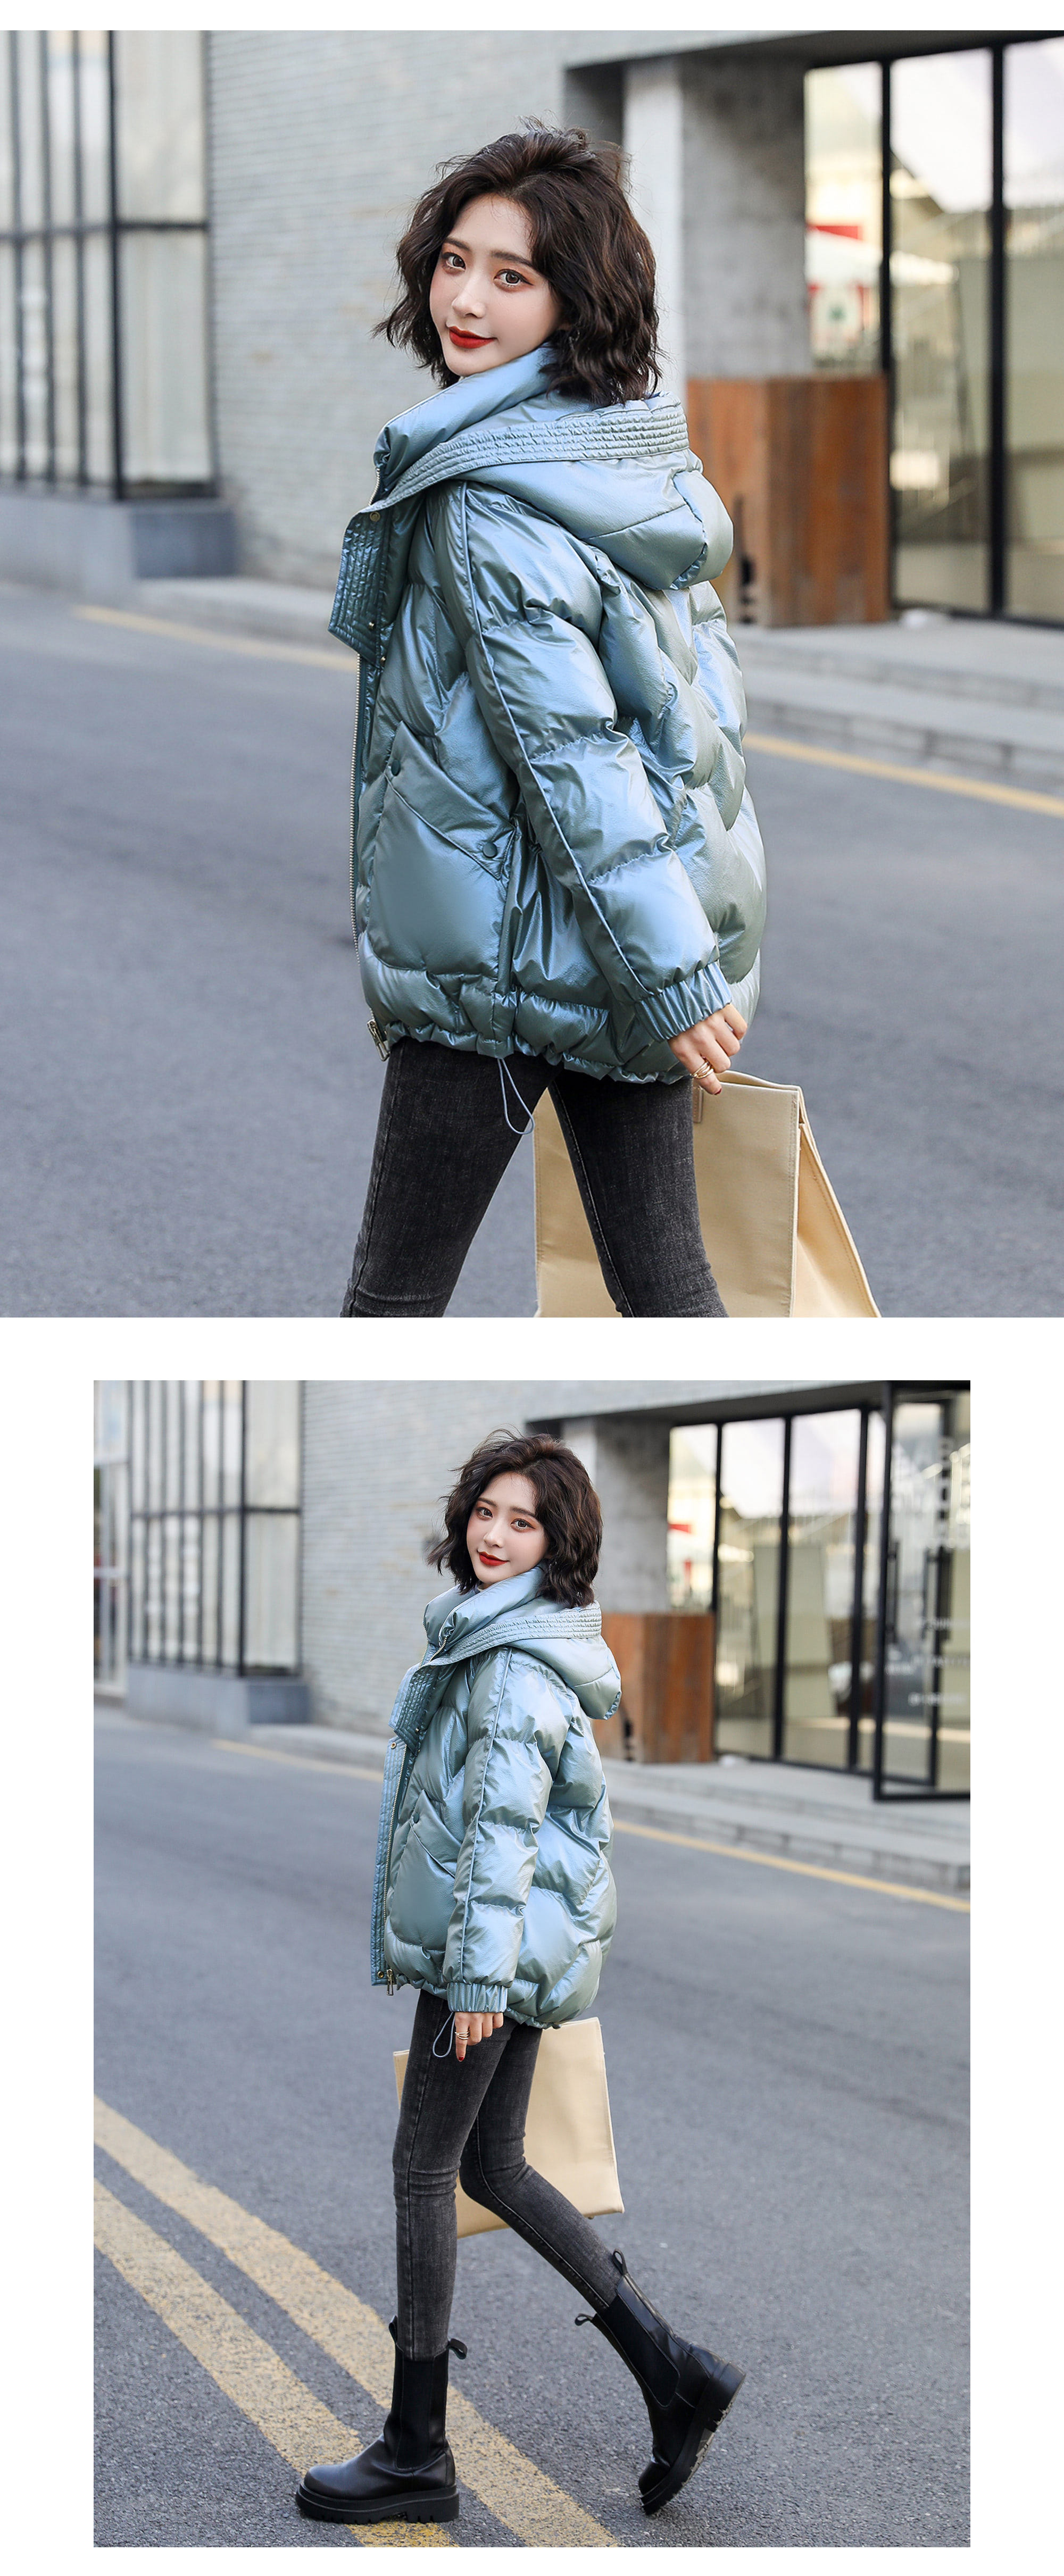 Fashion Hooded Winter Outfit Cotton Short Down Jacket17